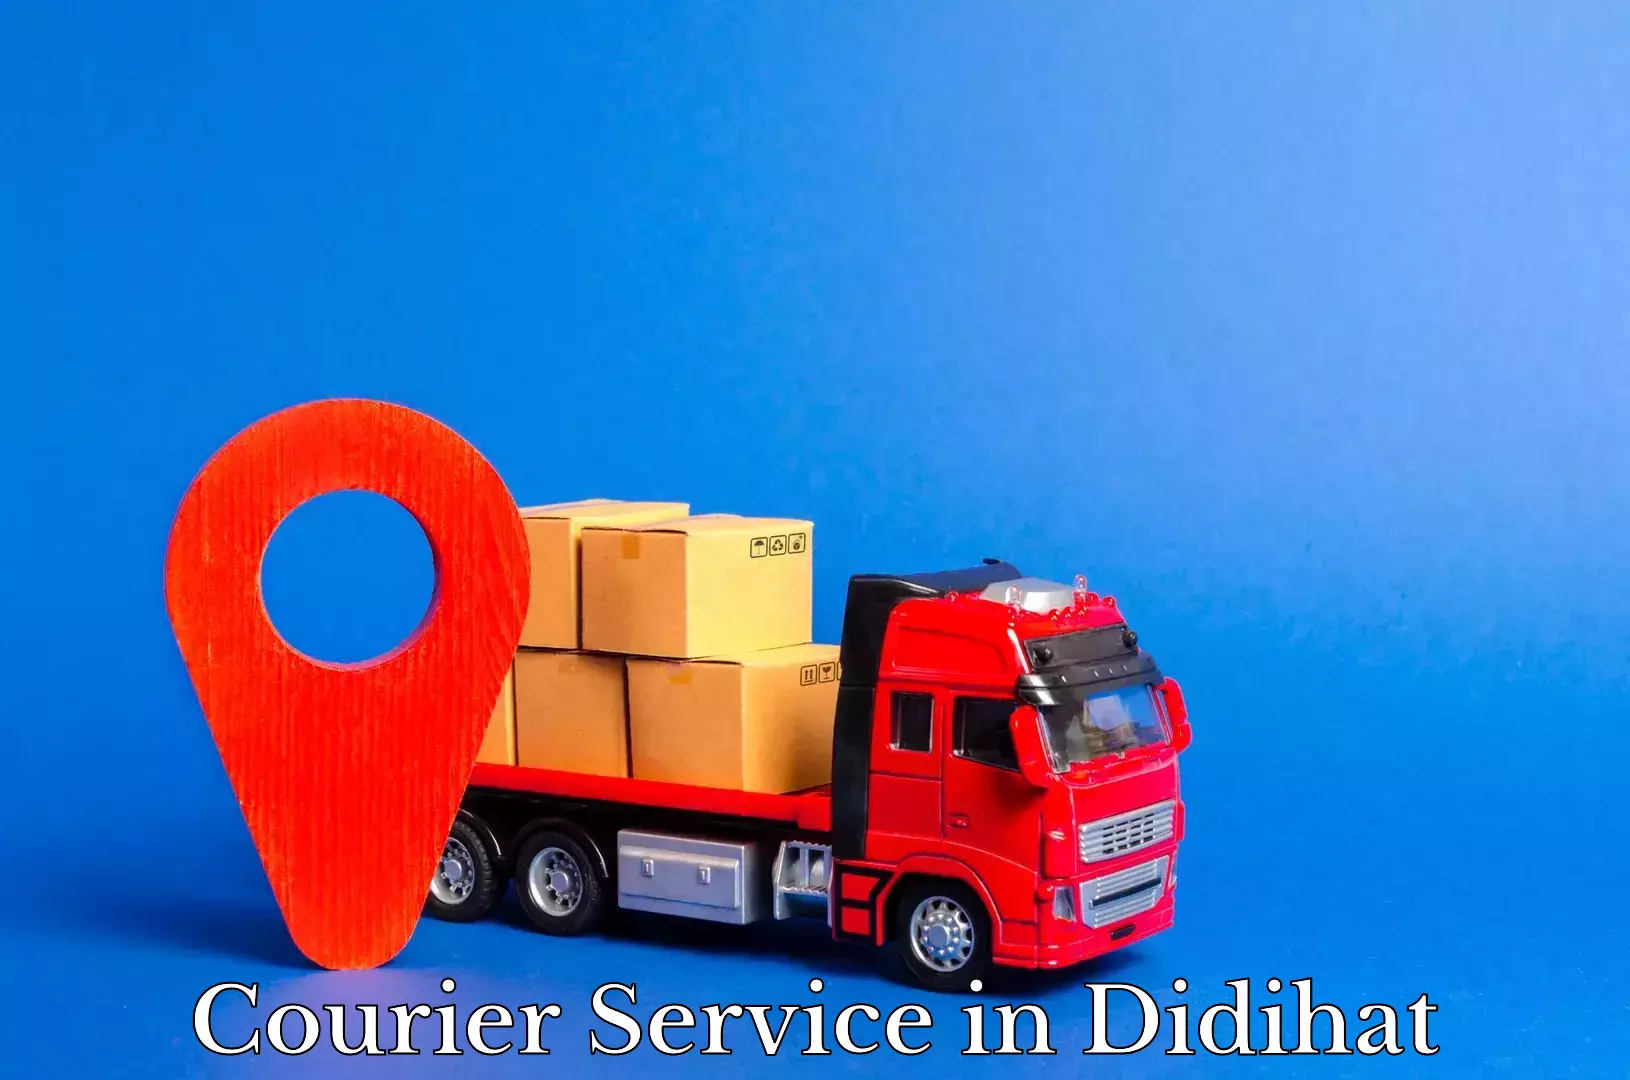 Seamless shipping experience in Didihat